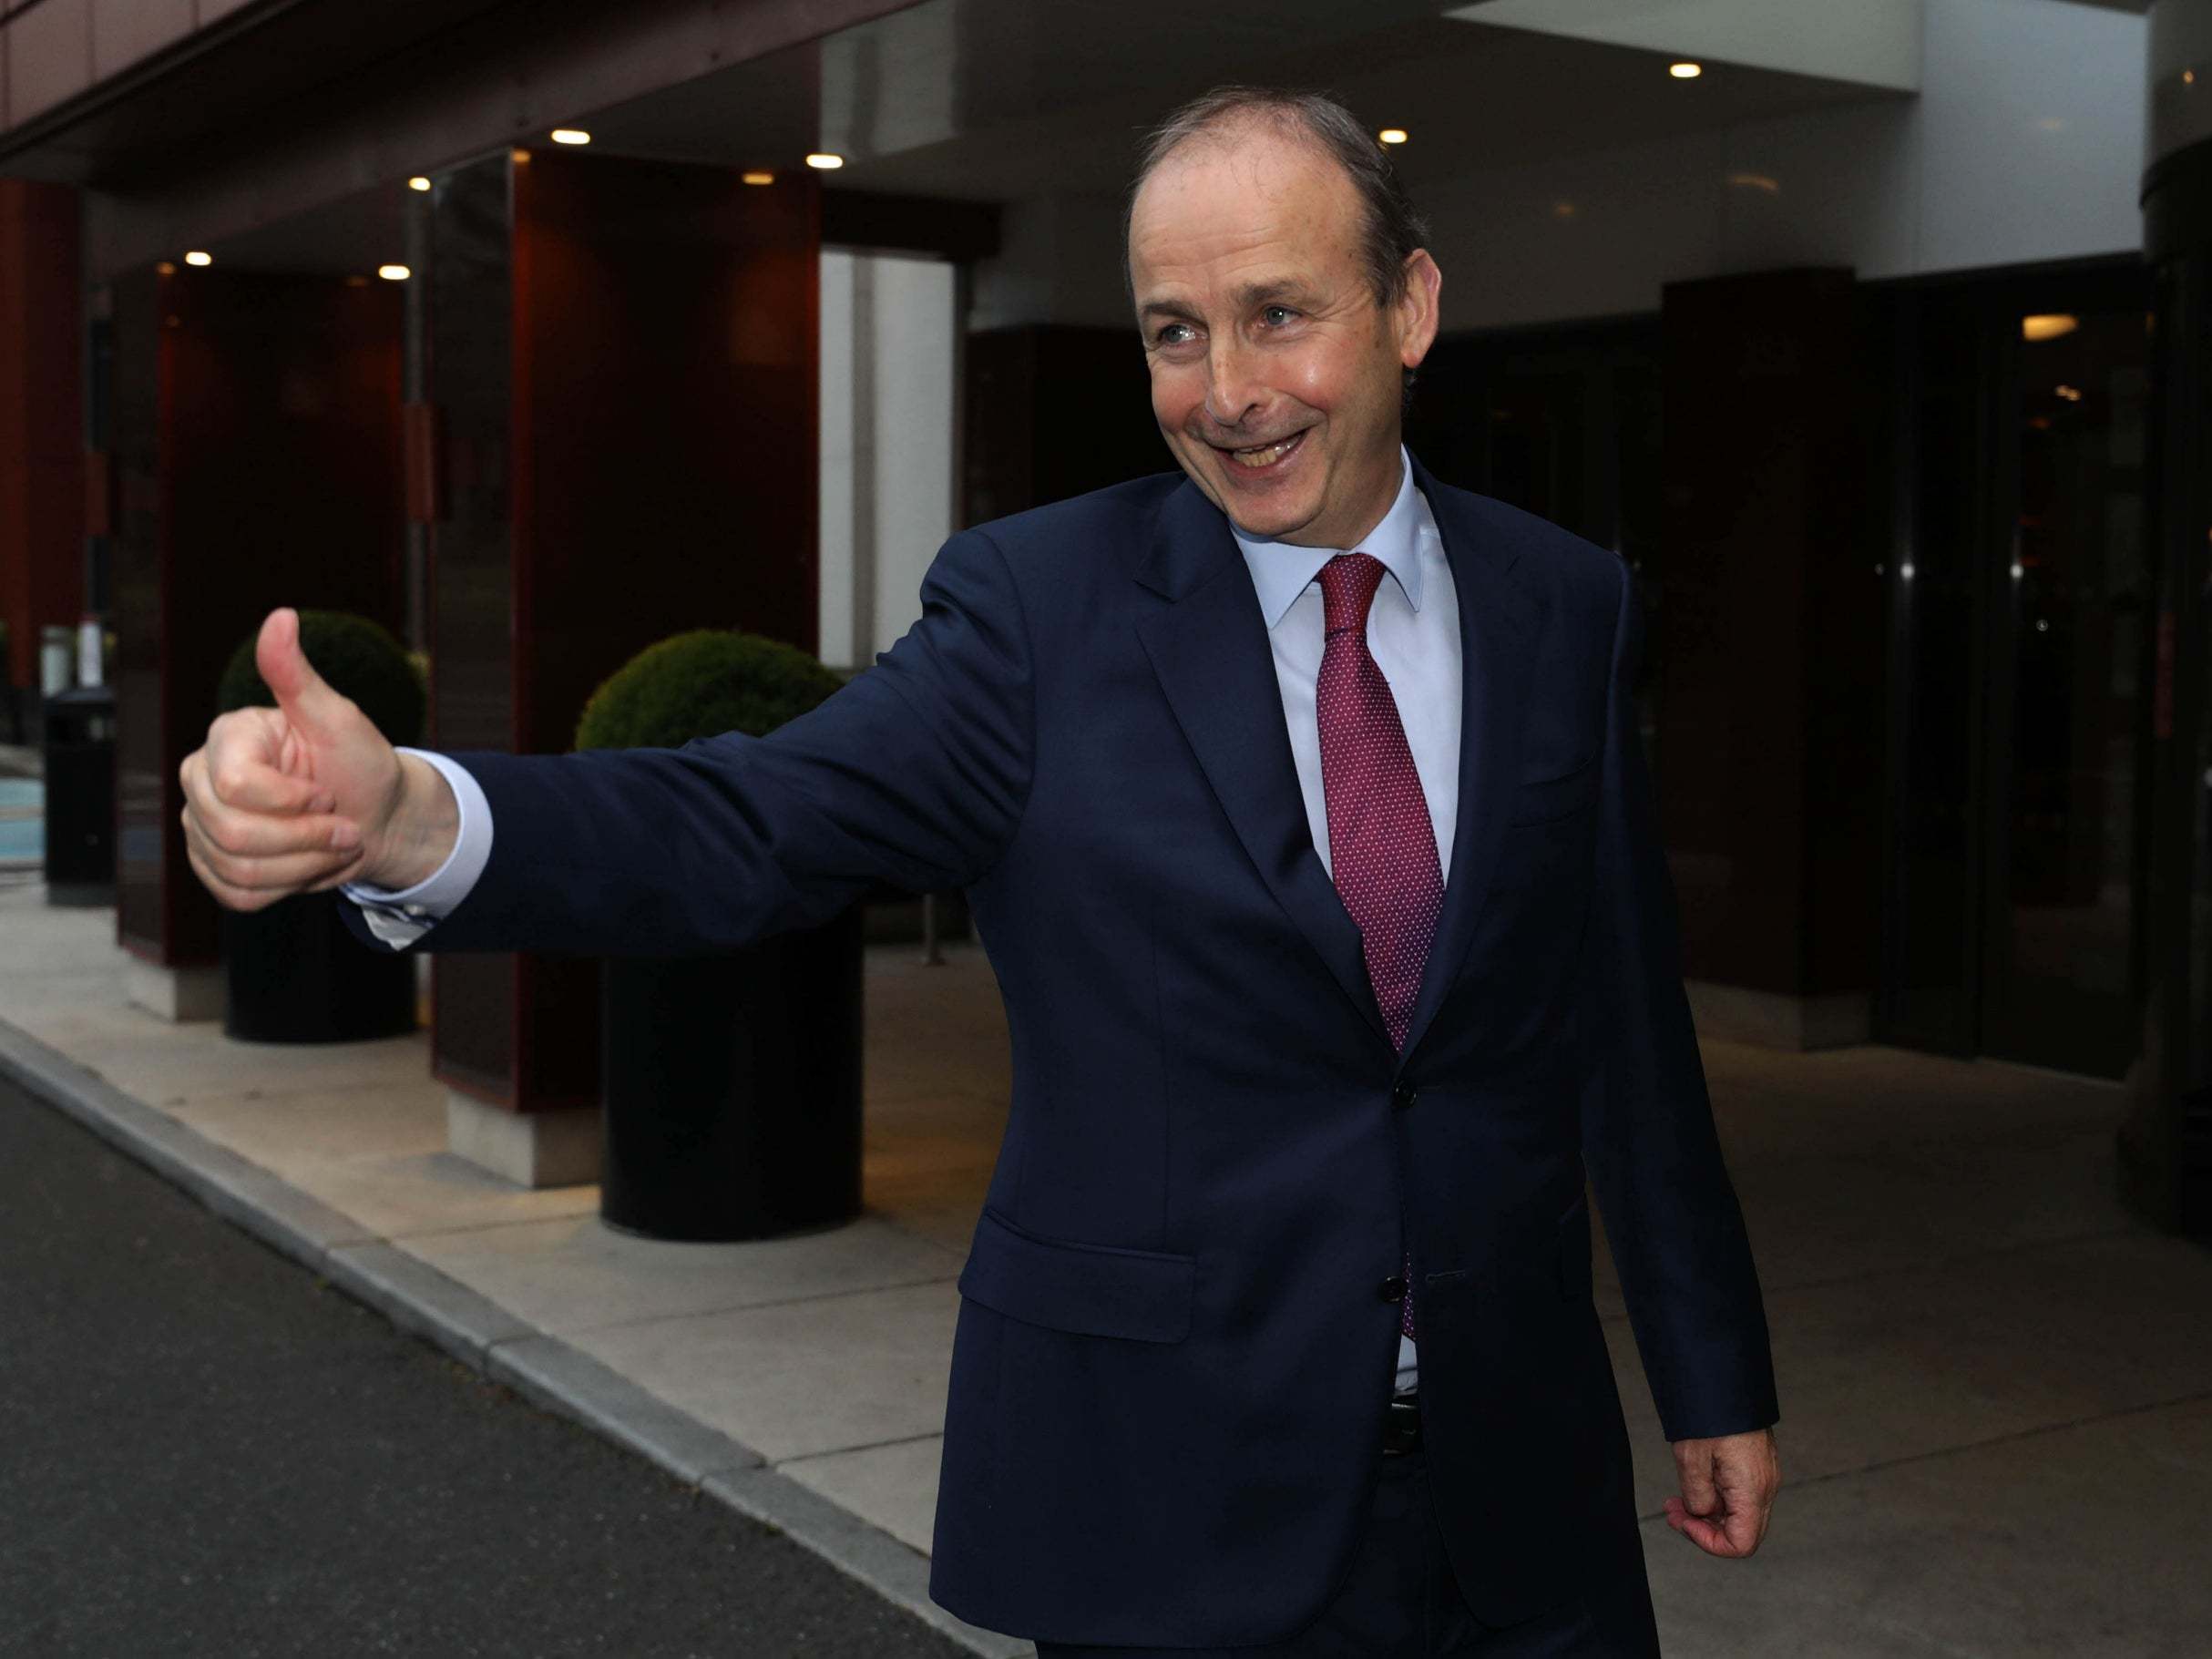 Fianna Fail leader Micheal Martin is due to be chosen as the new Irish premier on Saturday